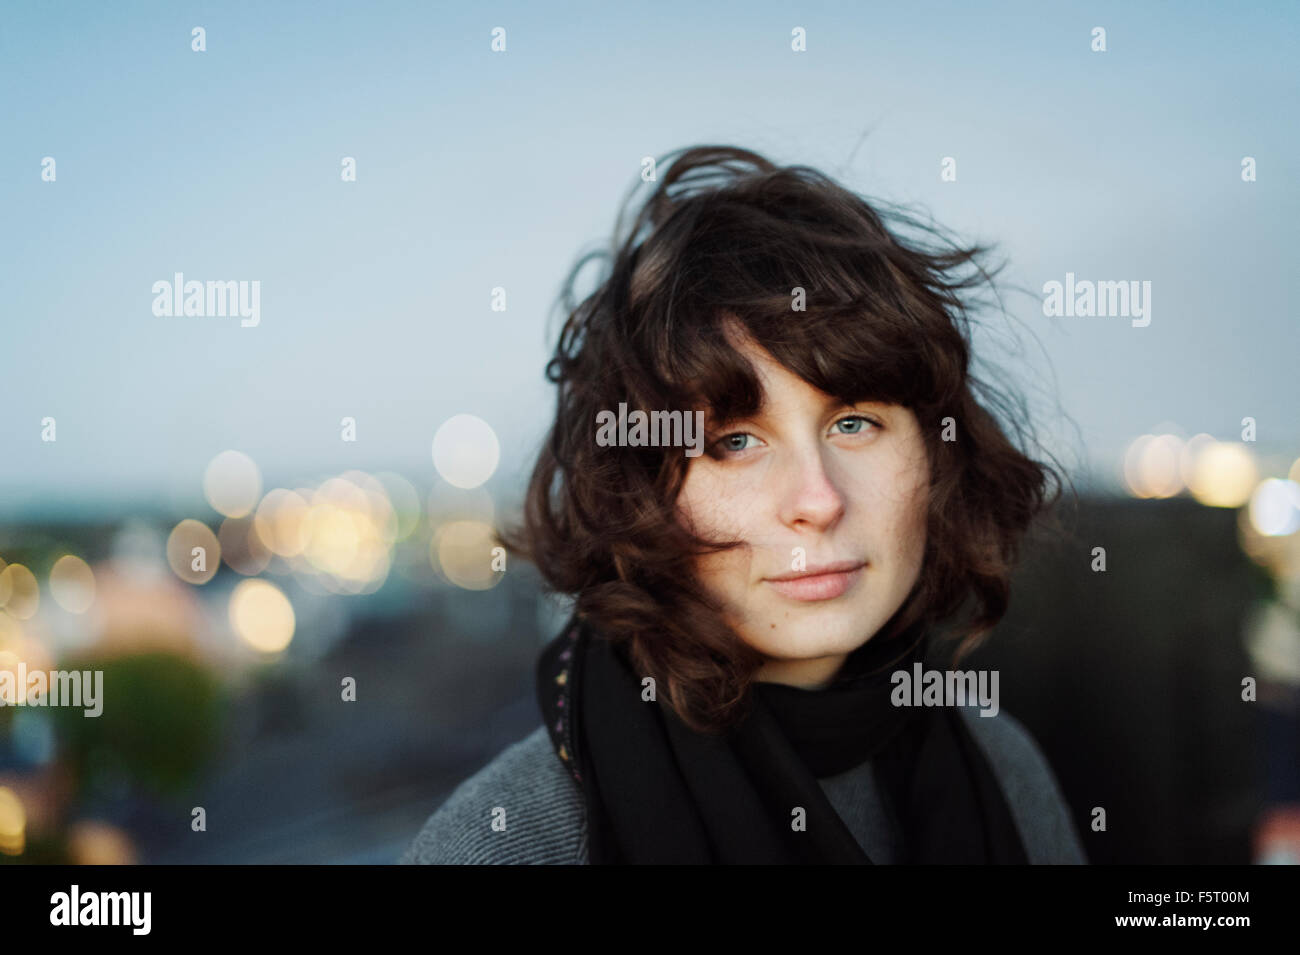 Sweden, Sodermanland, Portrait of young woman at dusk Stock Photo